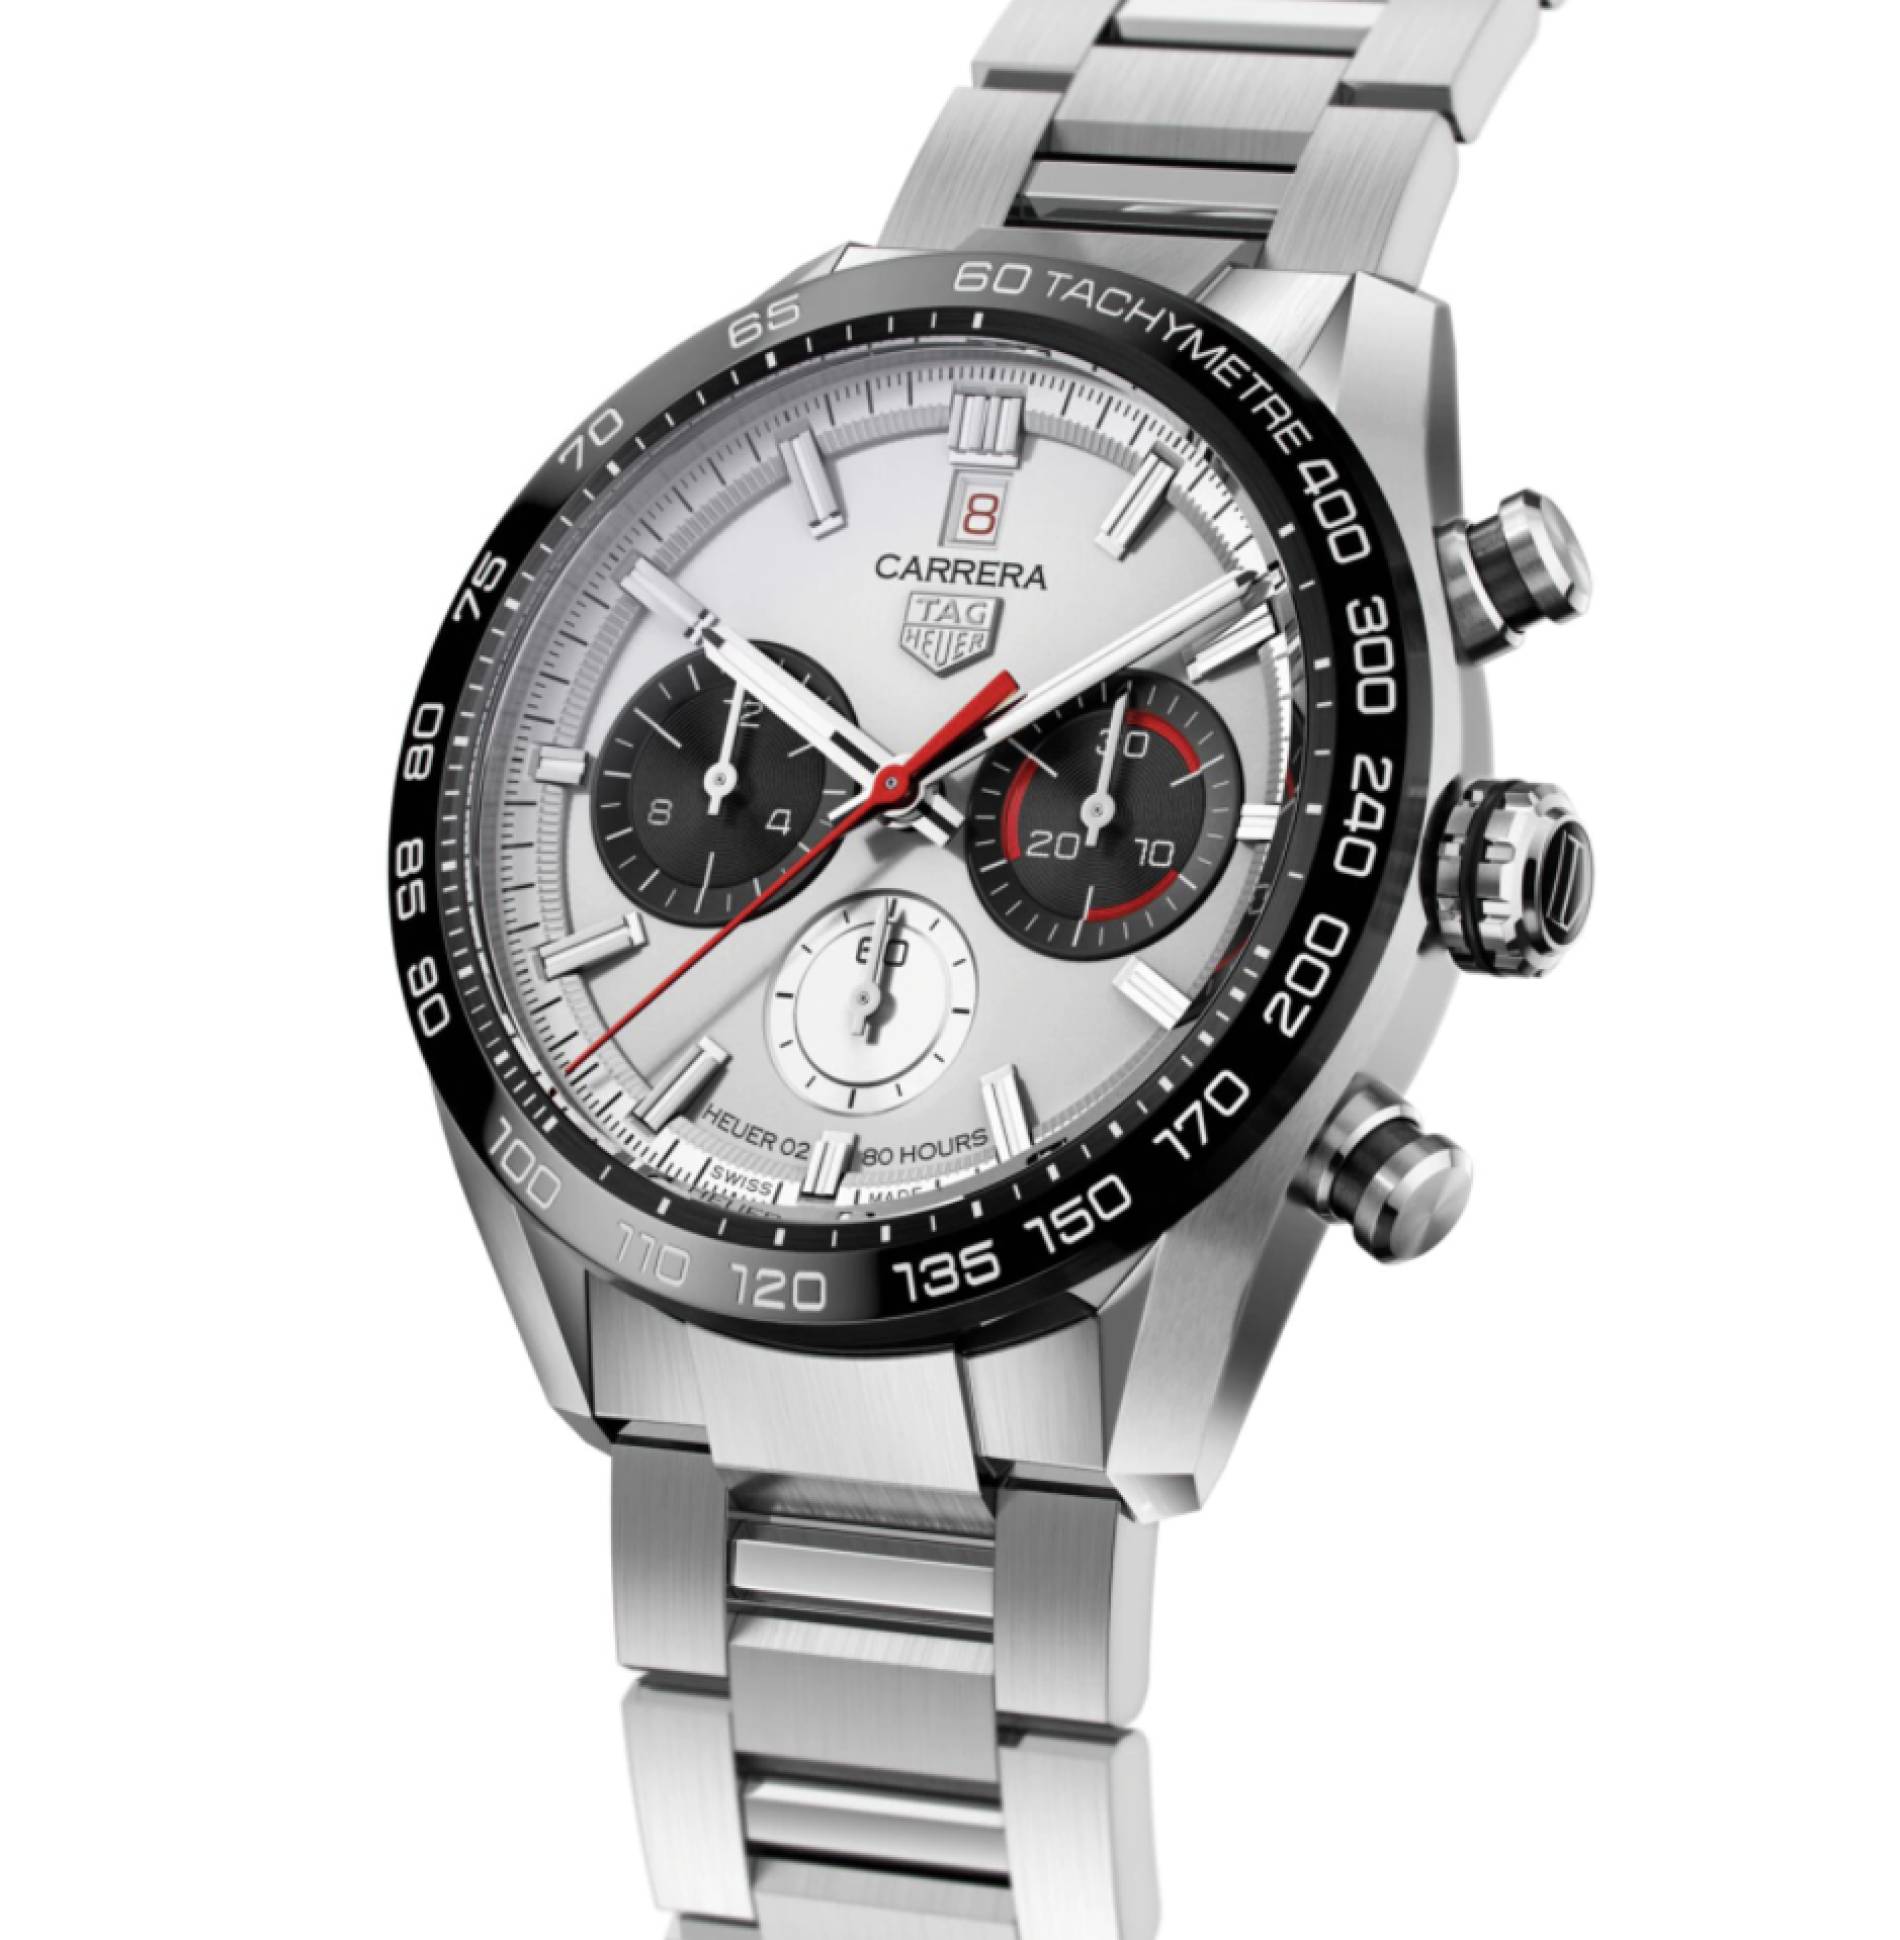 Tag Heuer 160th Anniversary Carrera 44mm OR £4,000 CASH